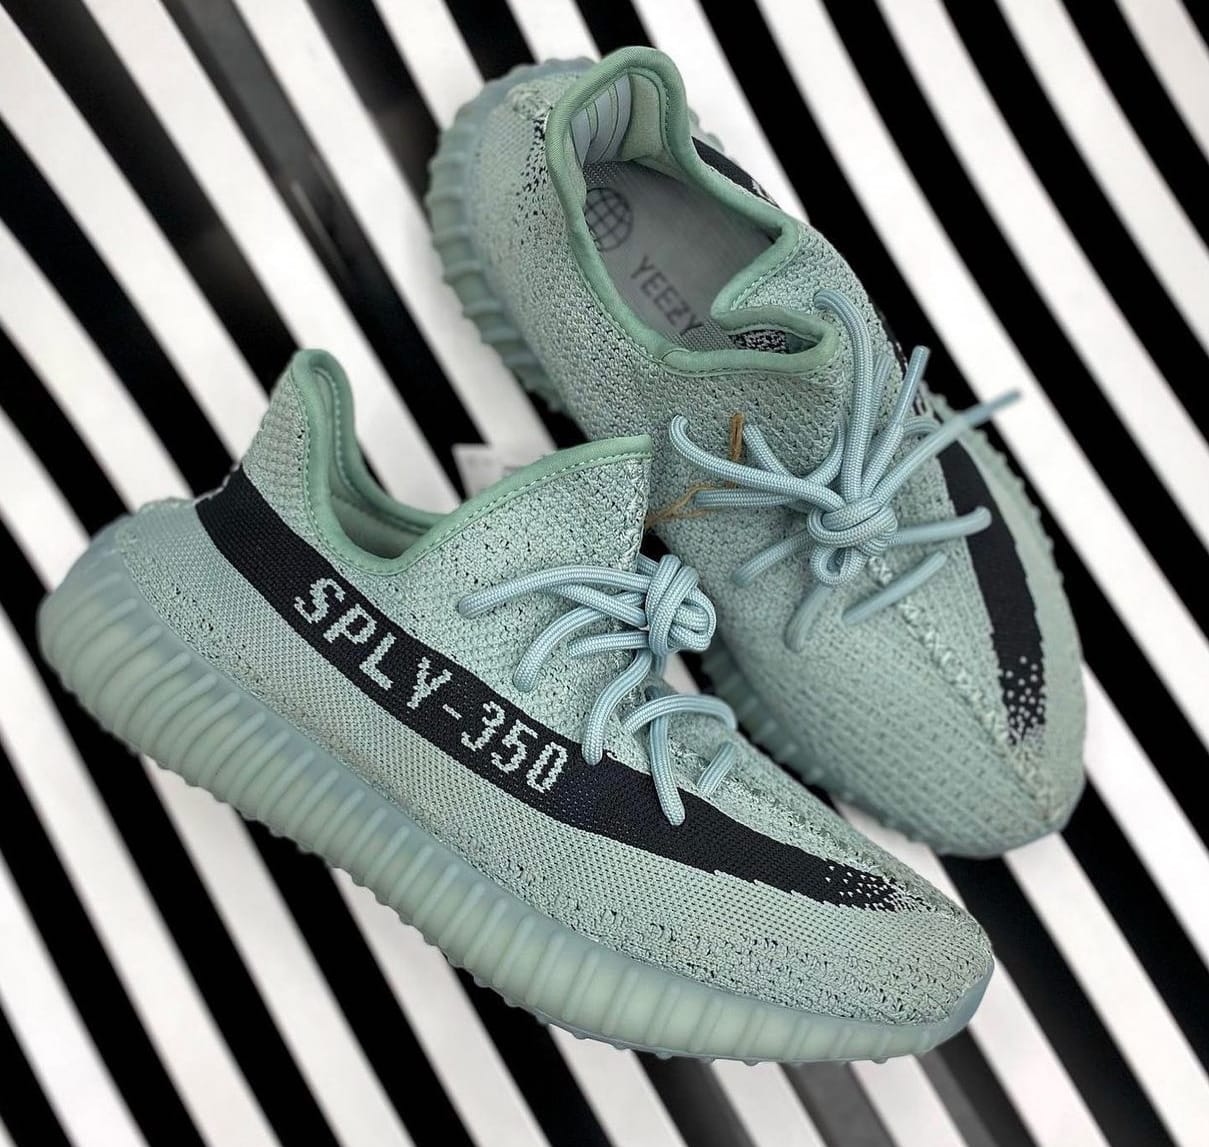 First Look at the 'Salt' Adidas Yeezy Boost 350 V2 | Complex